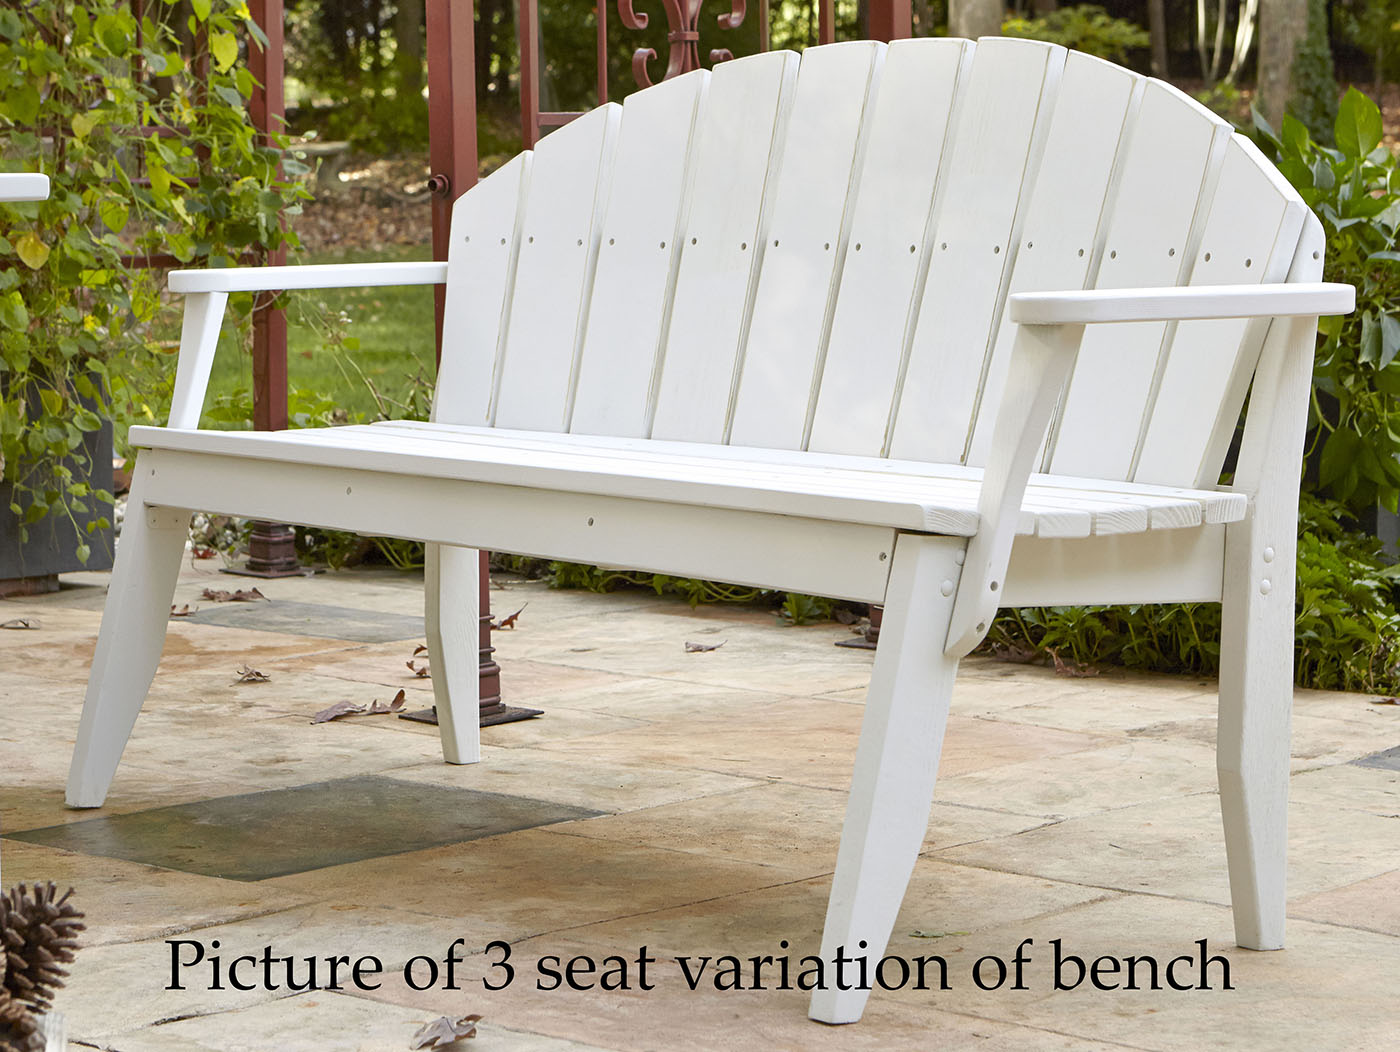 Chair Plaza 4 Seat Outdoor Bench